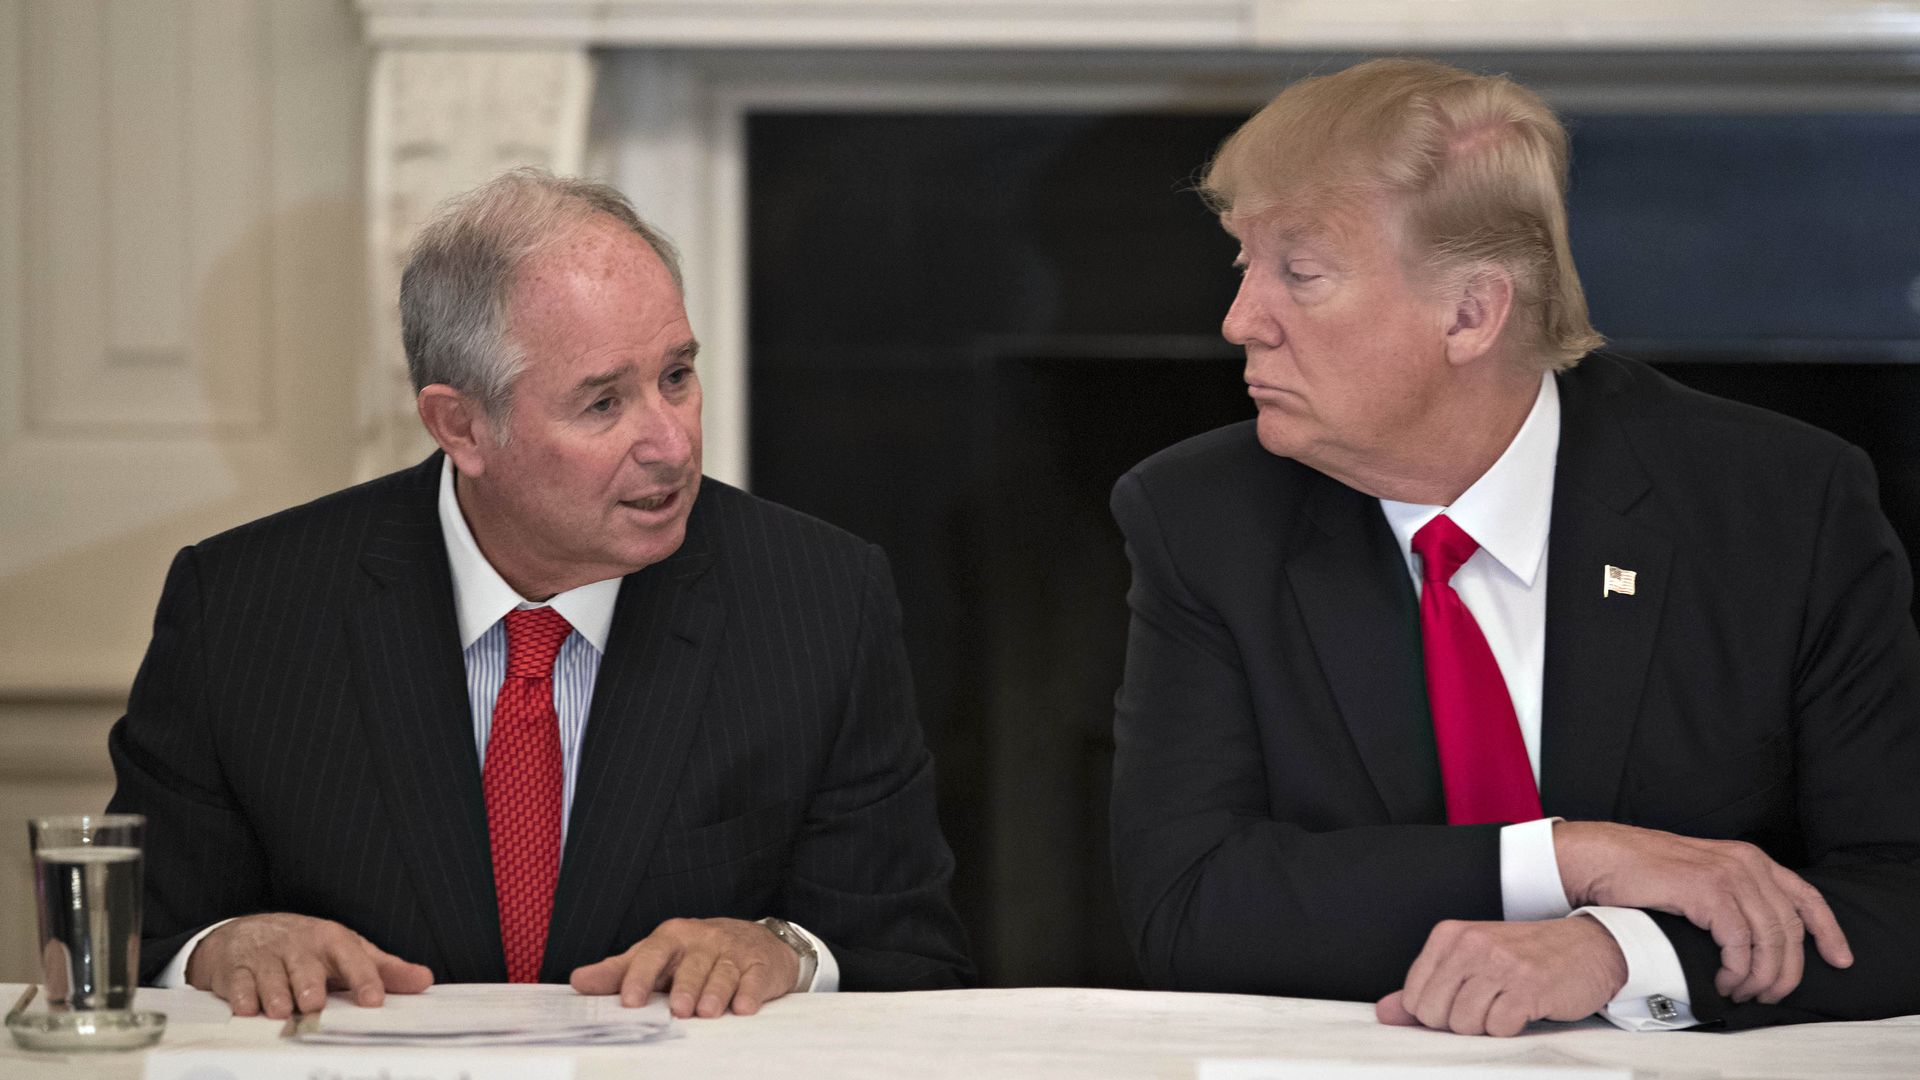 Stephen A. Schwarzman (left) speaks next to former President Trump during a 2017 meeting at the White House. Photo: Andrew Harrer/Bloomberg via Getty Images